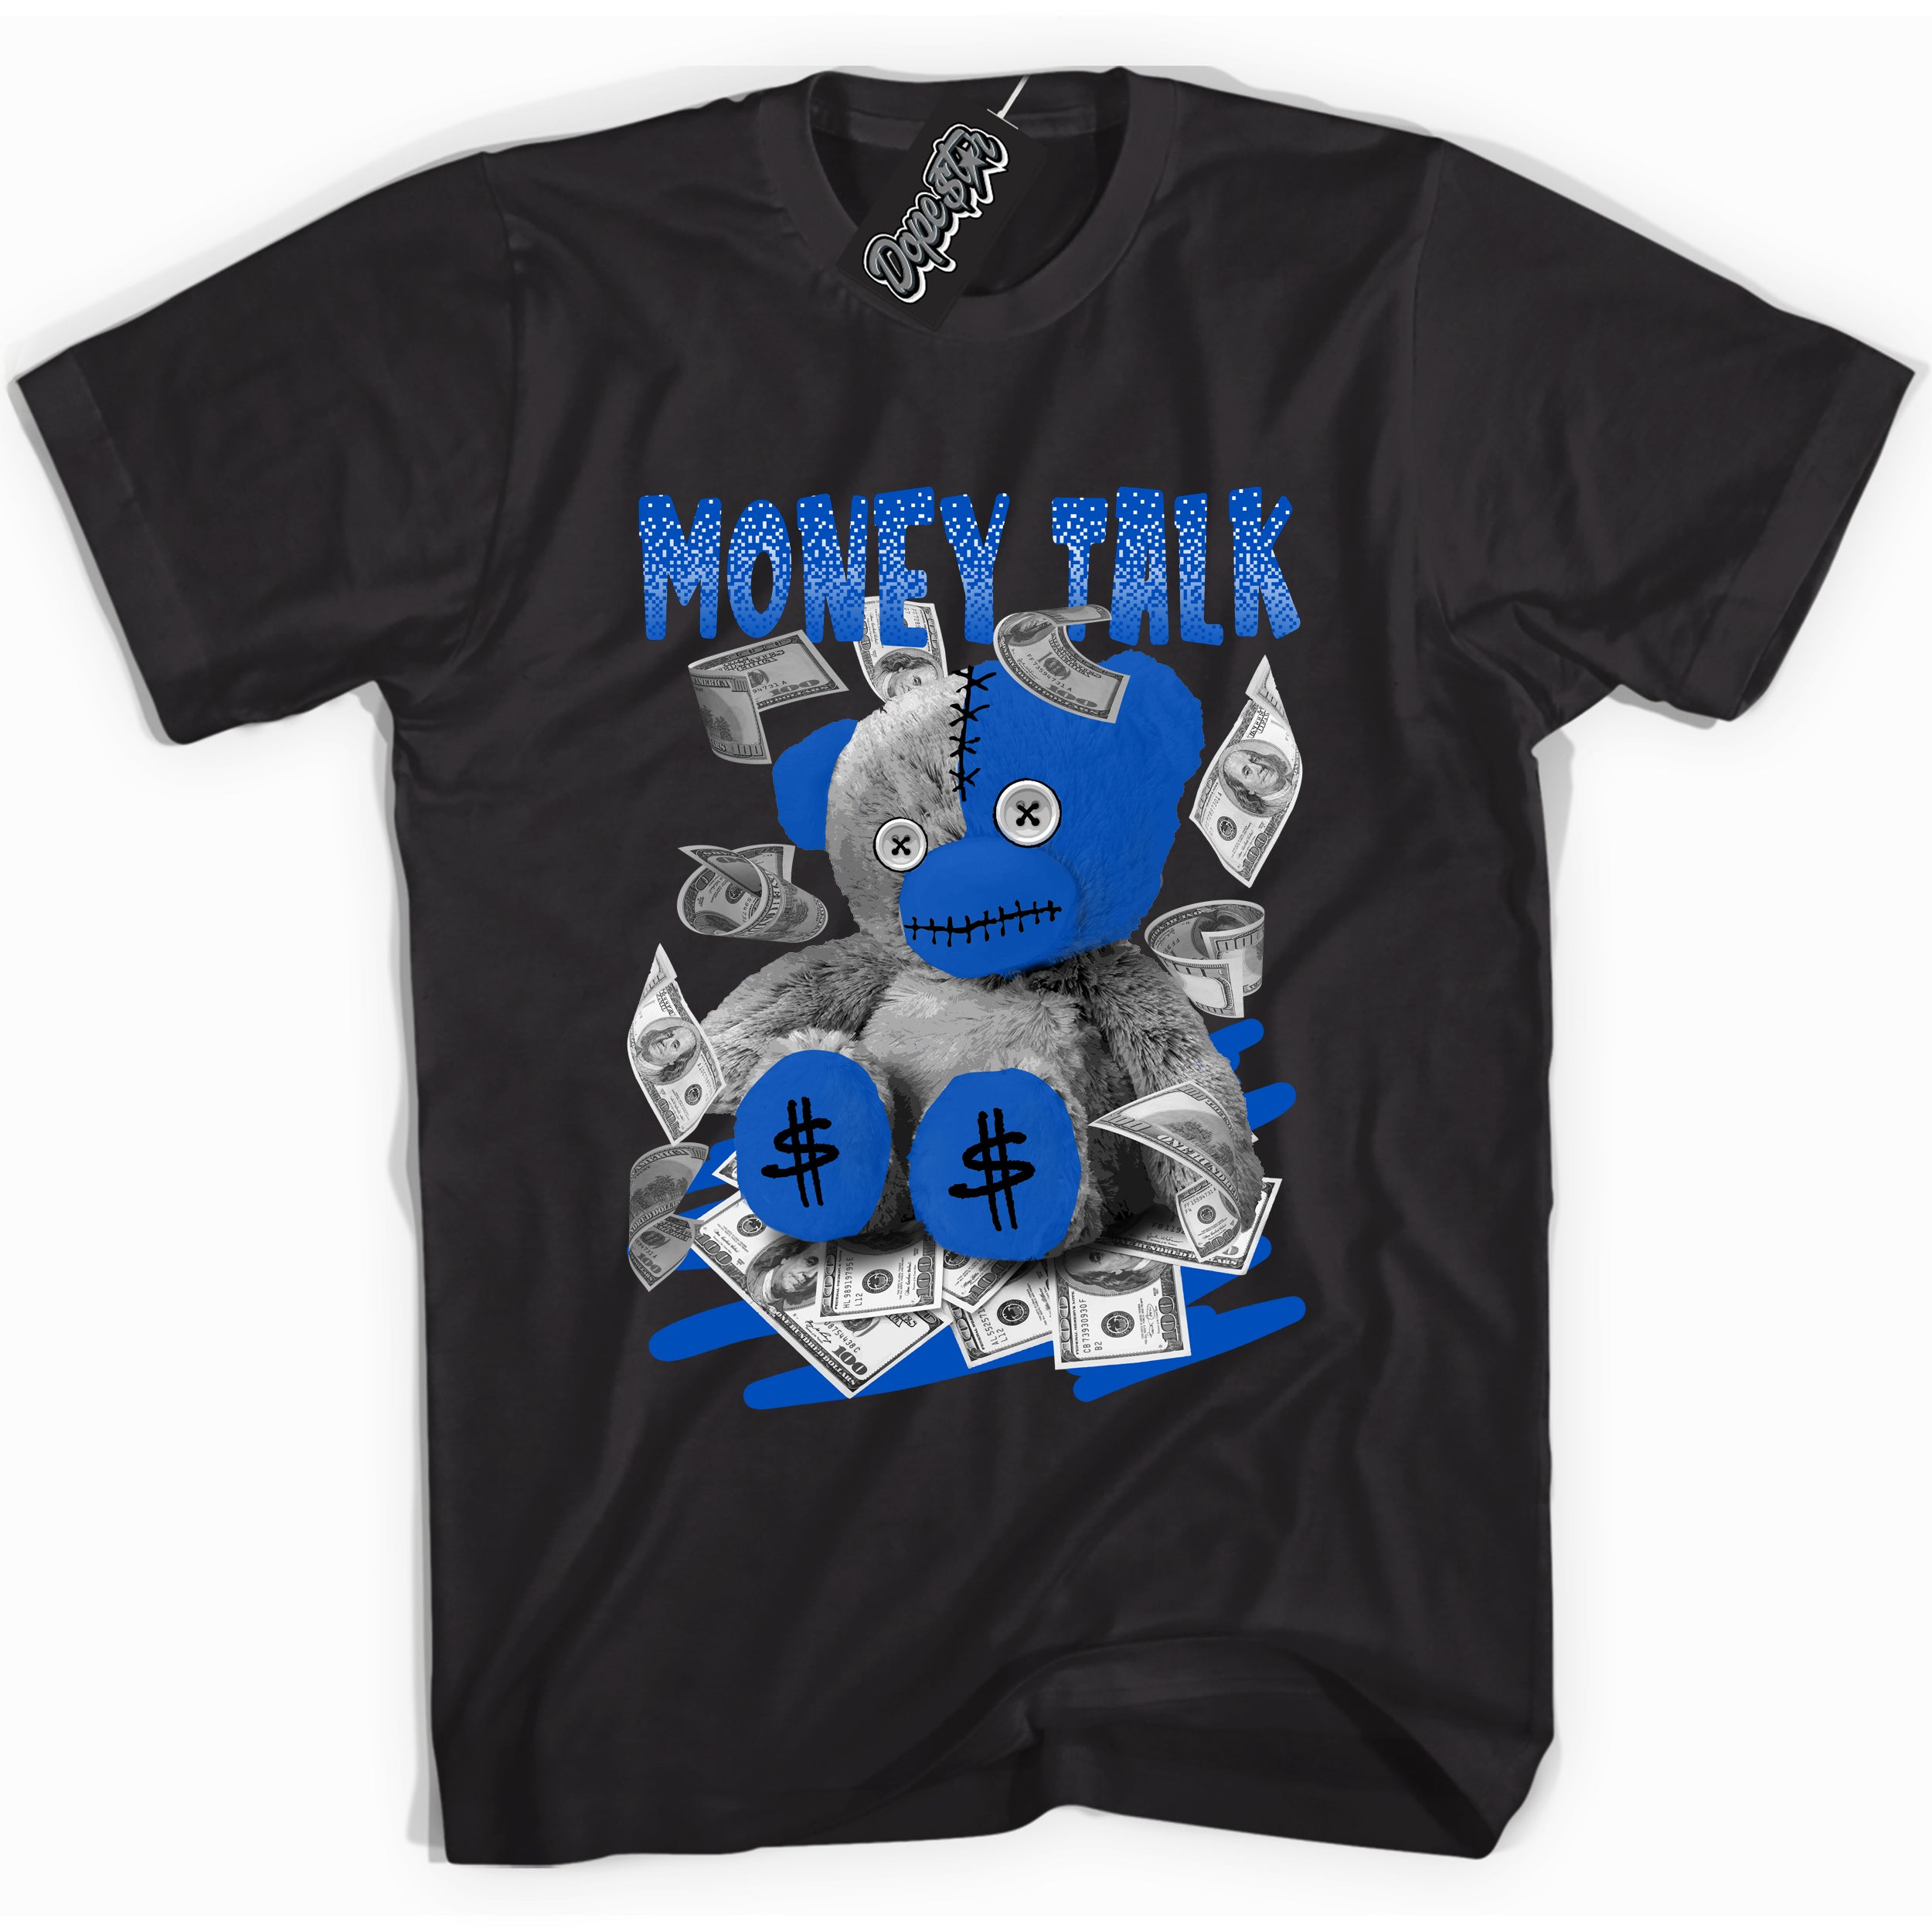 Cool Black graphic tee with "Money Talk Bear" design, that perfectly matches Royal Reimagined 1s sneakers 